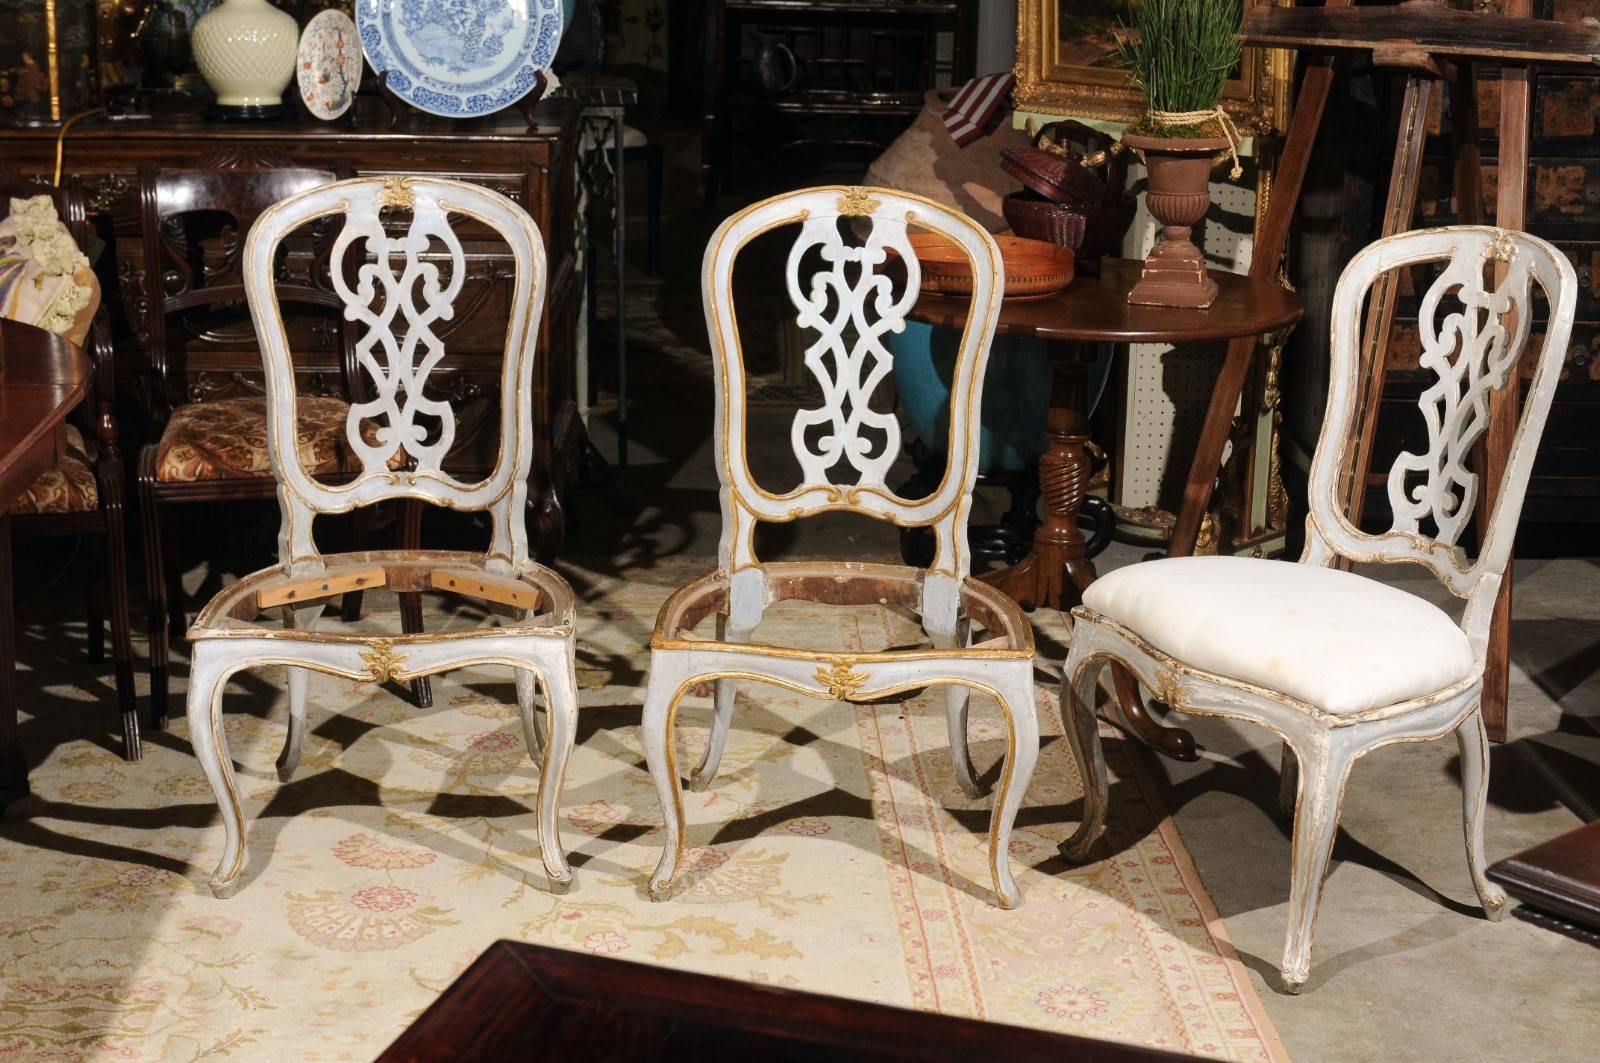 A fabulous set of six 19th century antique painted and gilt dining chairs.
The paint and gilt highlight the hand-carved detail of the chairs. They are supported with cabriole legs. They are structurally in good condition and have just been